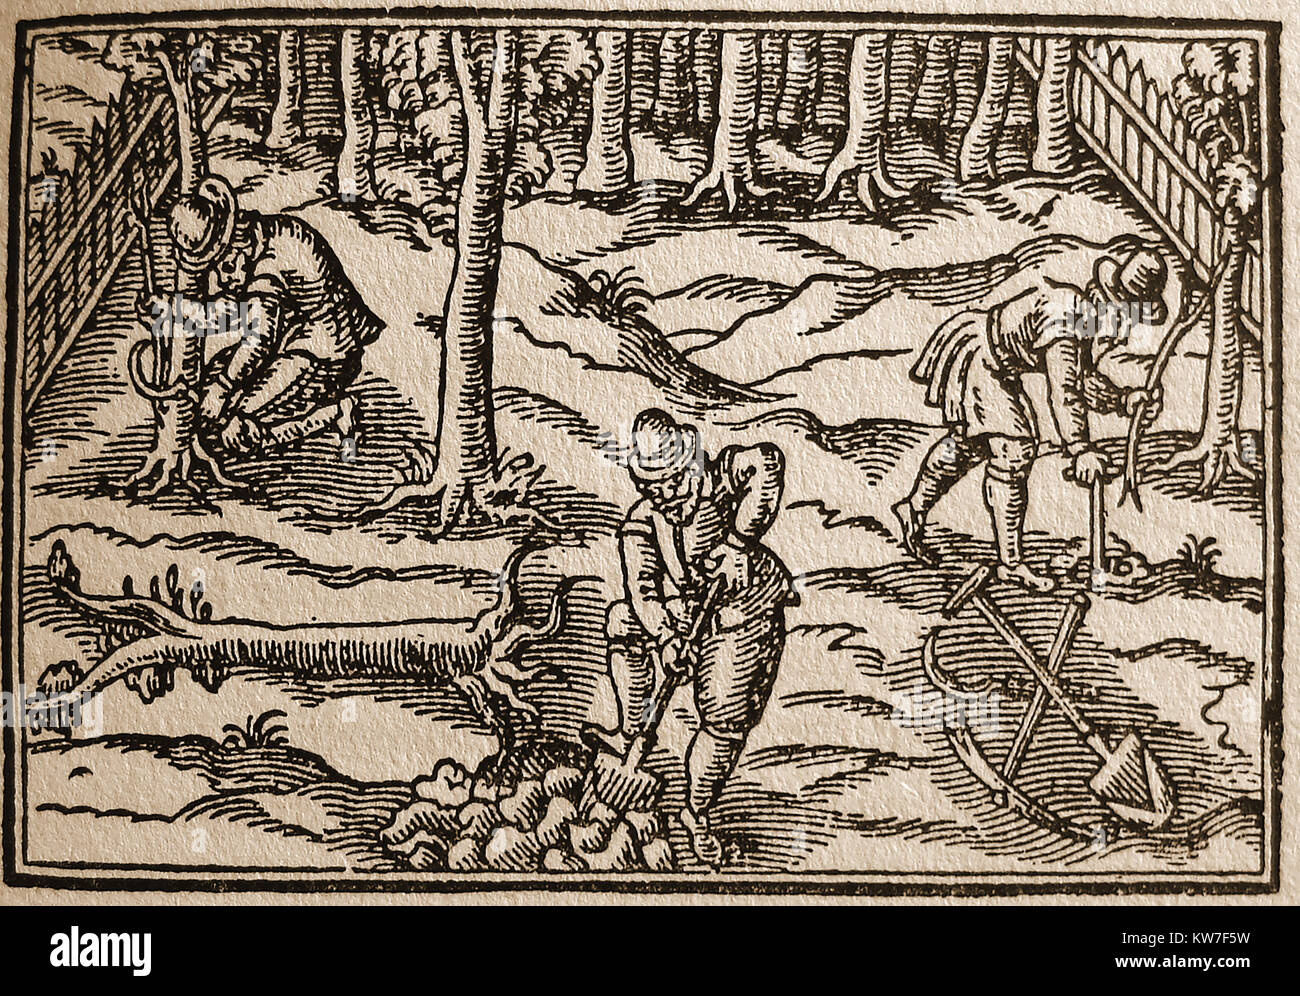 Medieval gardeners working  in an orchard  illustrating working tools - From a 17th century woodcut print Stock Photo